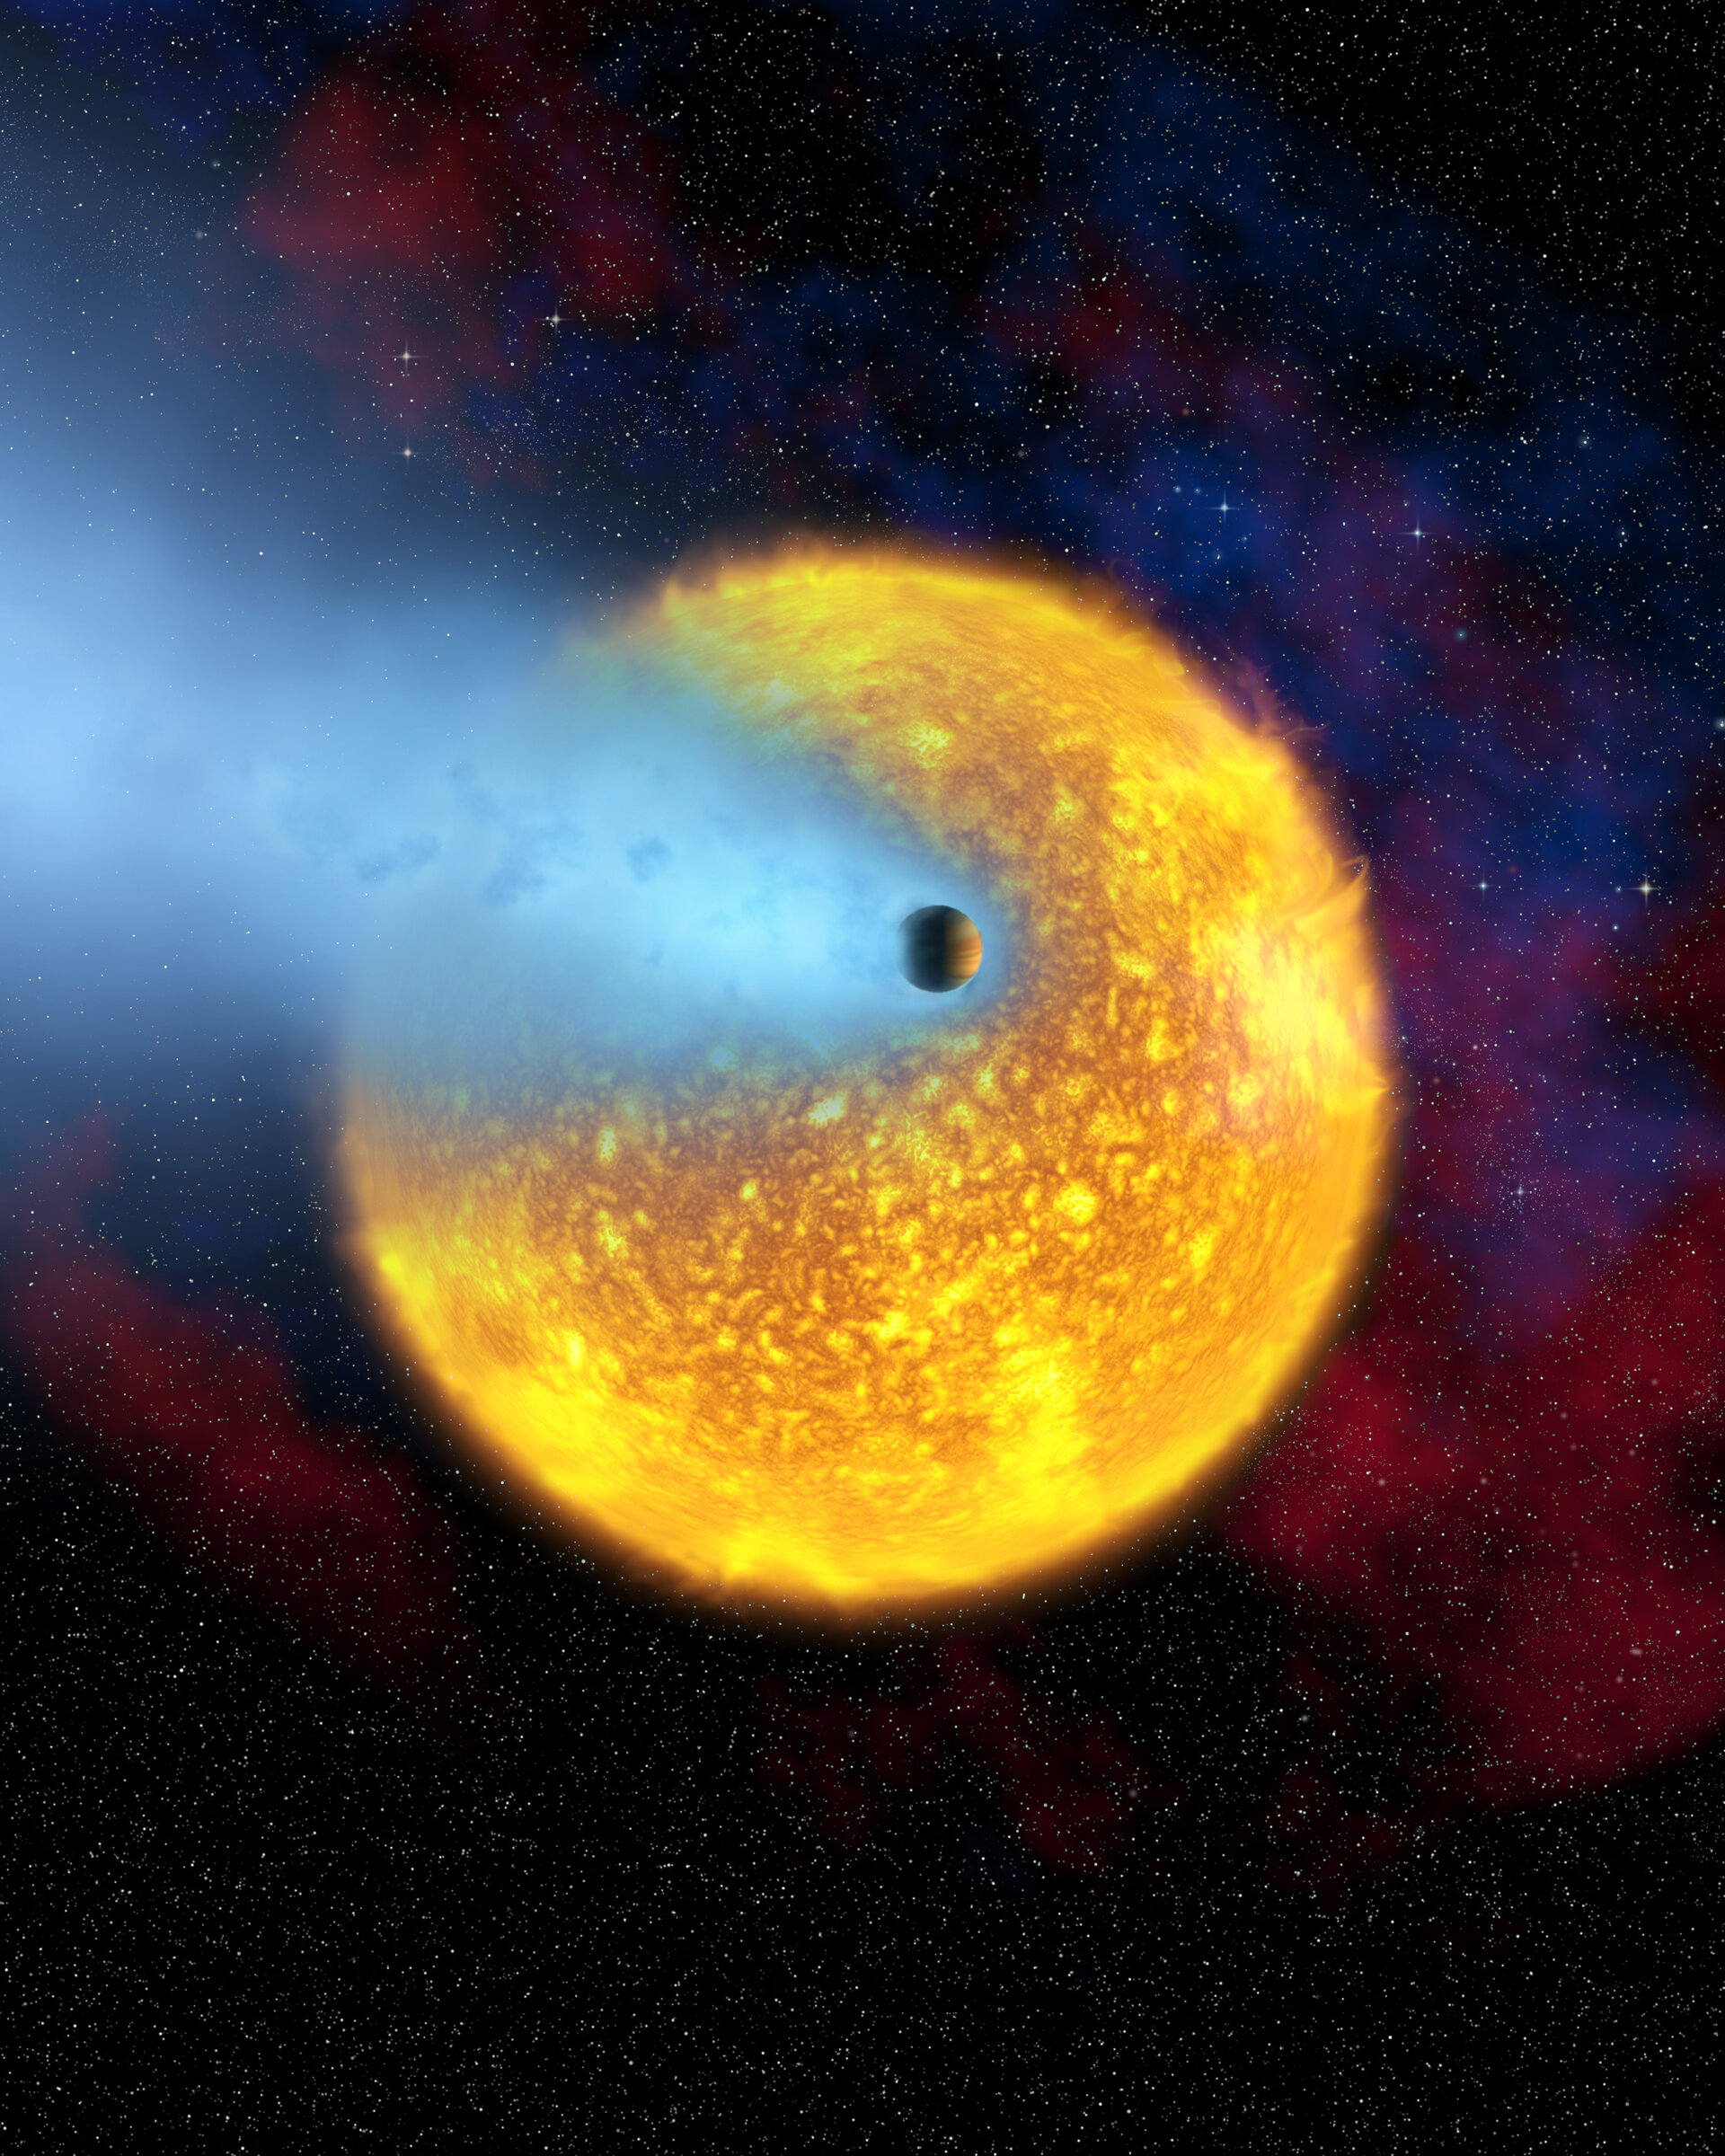 European astronomers observe first evaporating planet